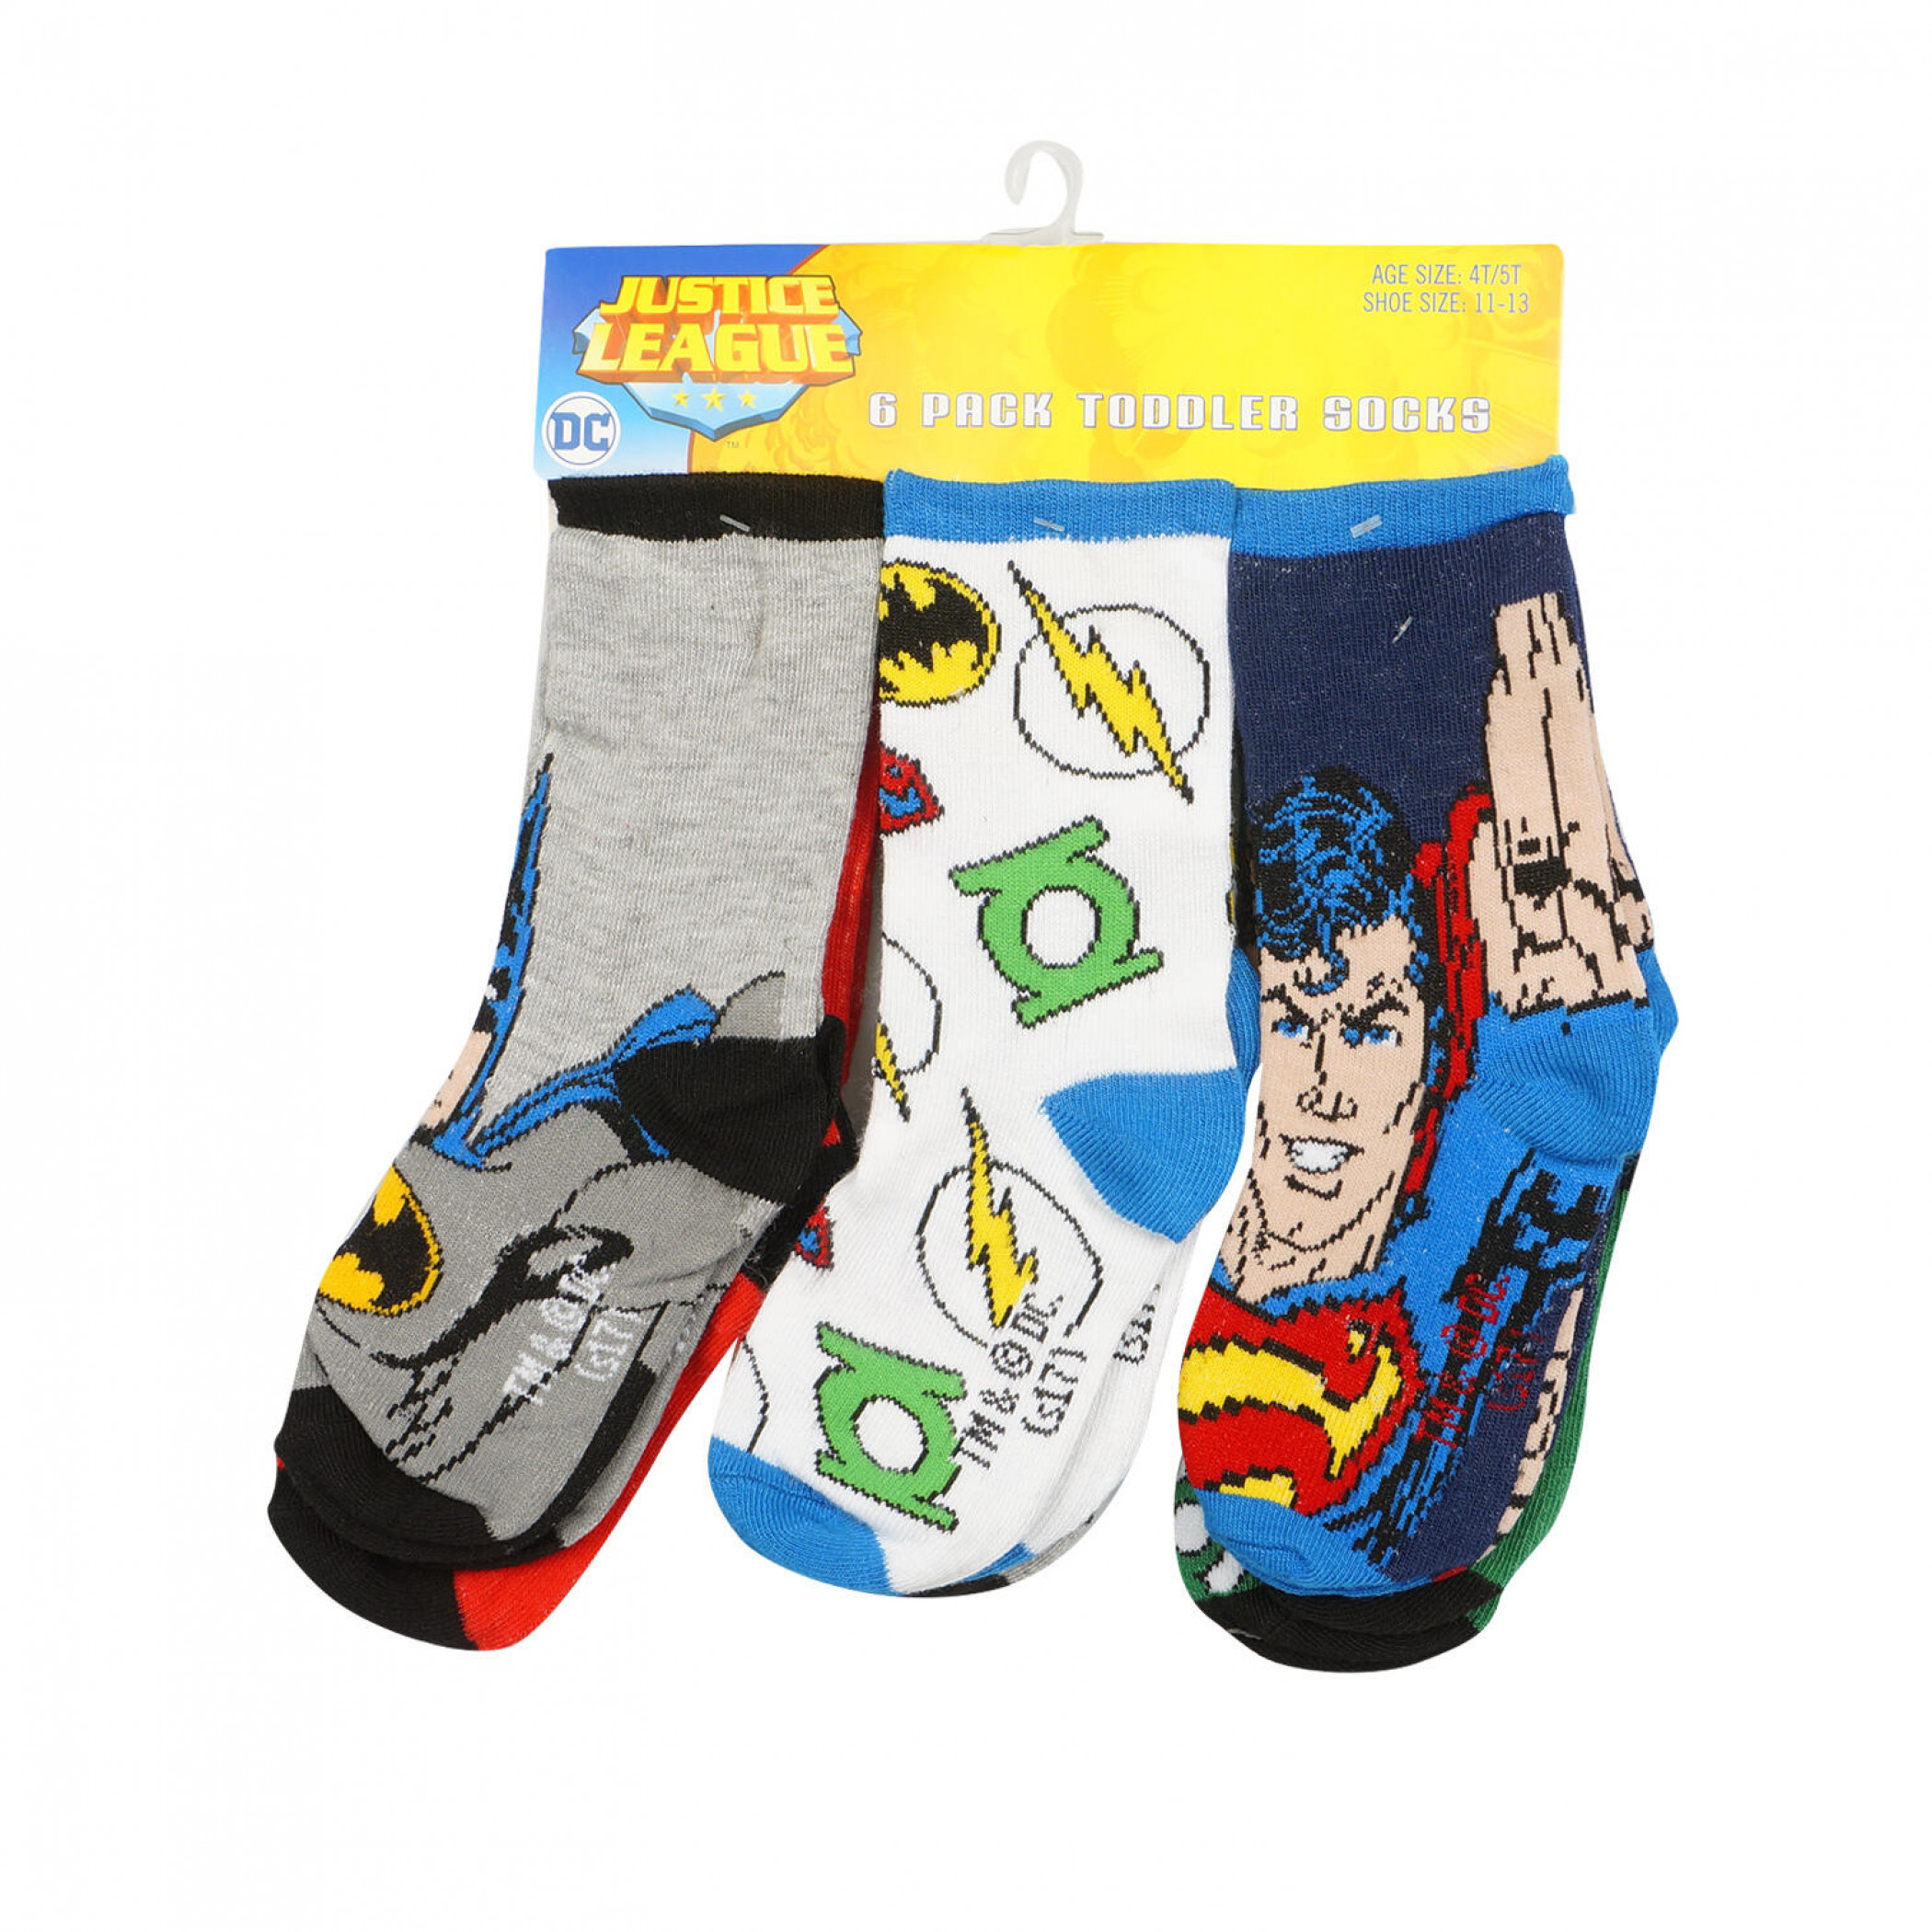 Justice League Characters and Symbols 6-Pair Pack of Toddler Socks